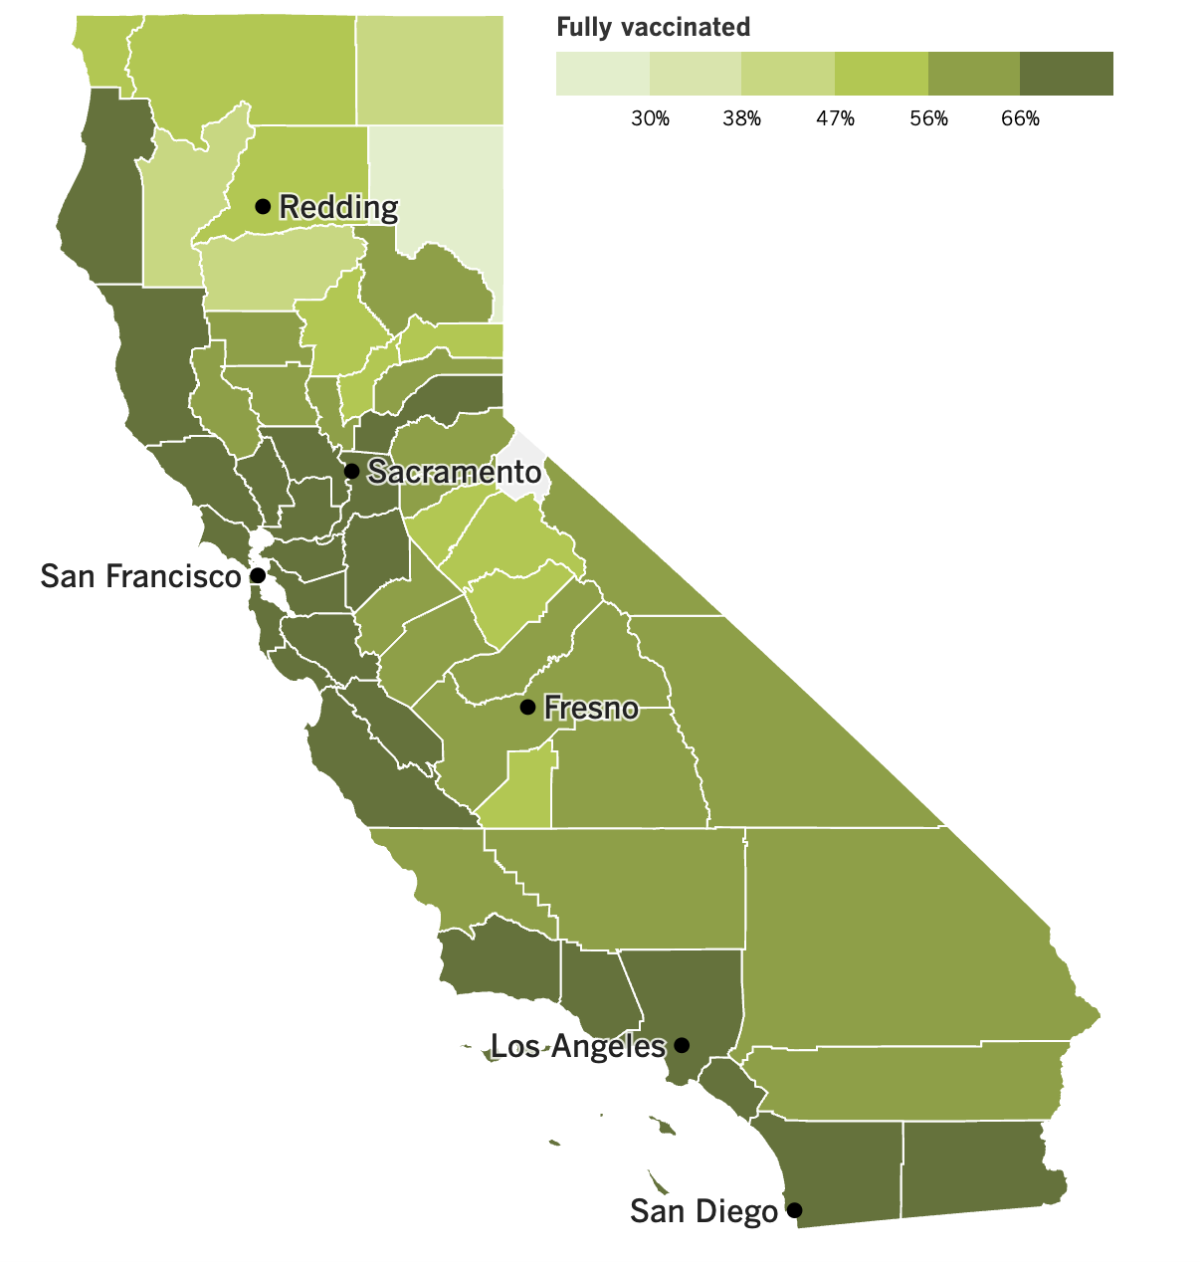 A map showing California's COVID-19 vaccination progress by county as of March 21, 2023.